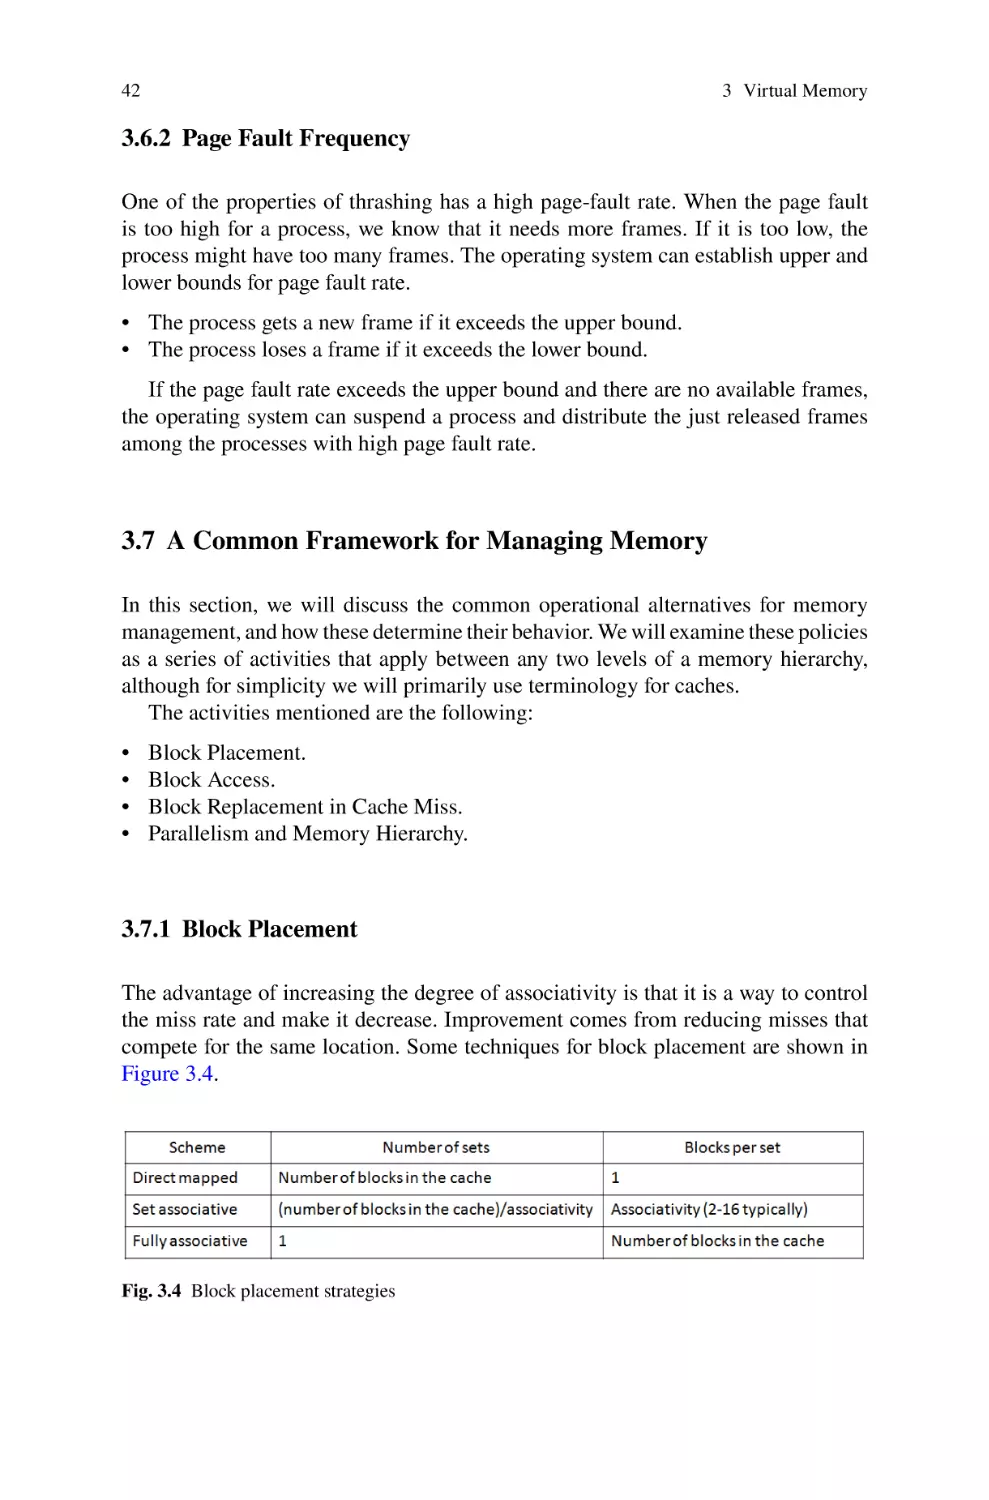 3.6.2 Page Fault Frequency
3.7 A Common Framework for Managing Memory
3.7.1 Block Placement